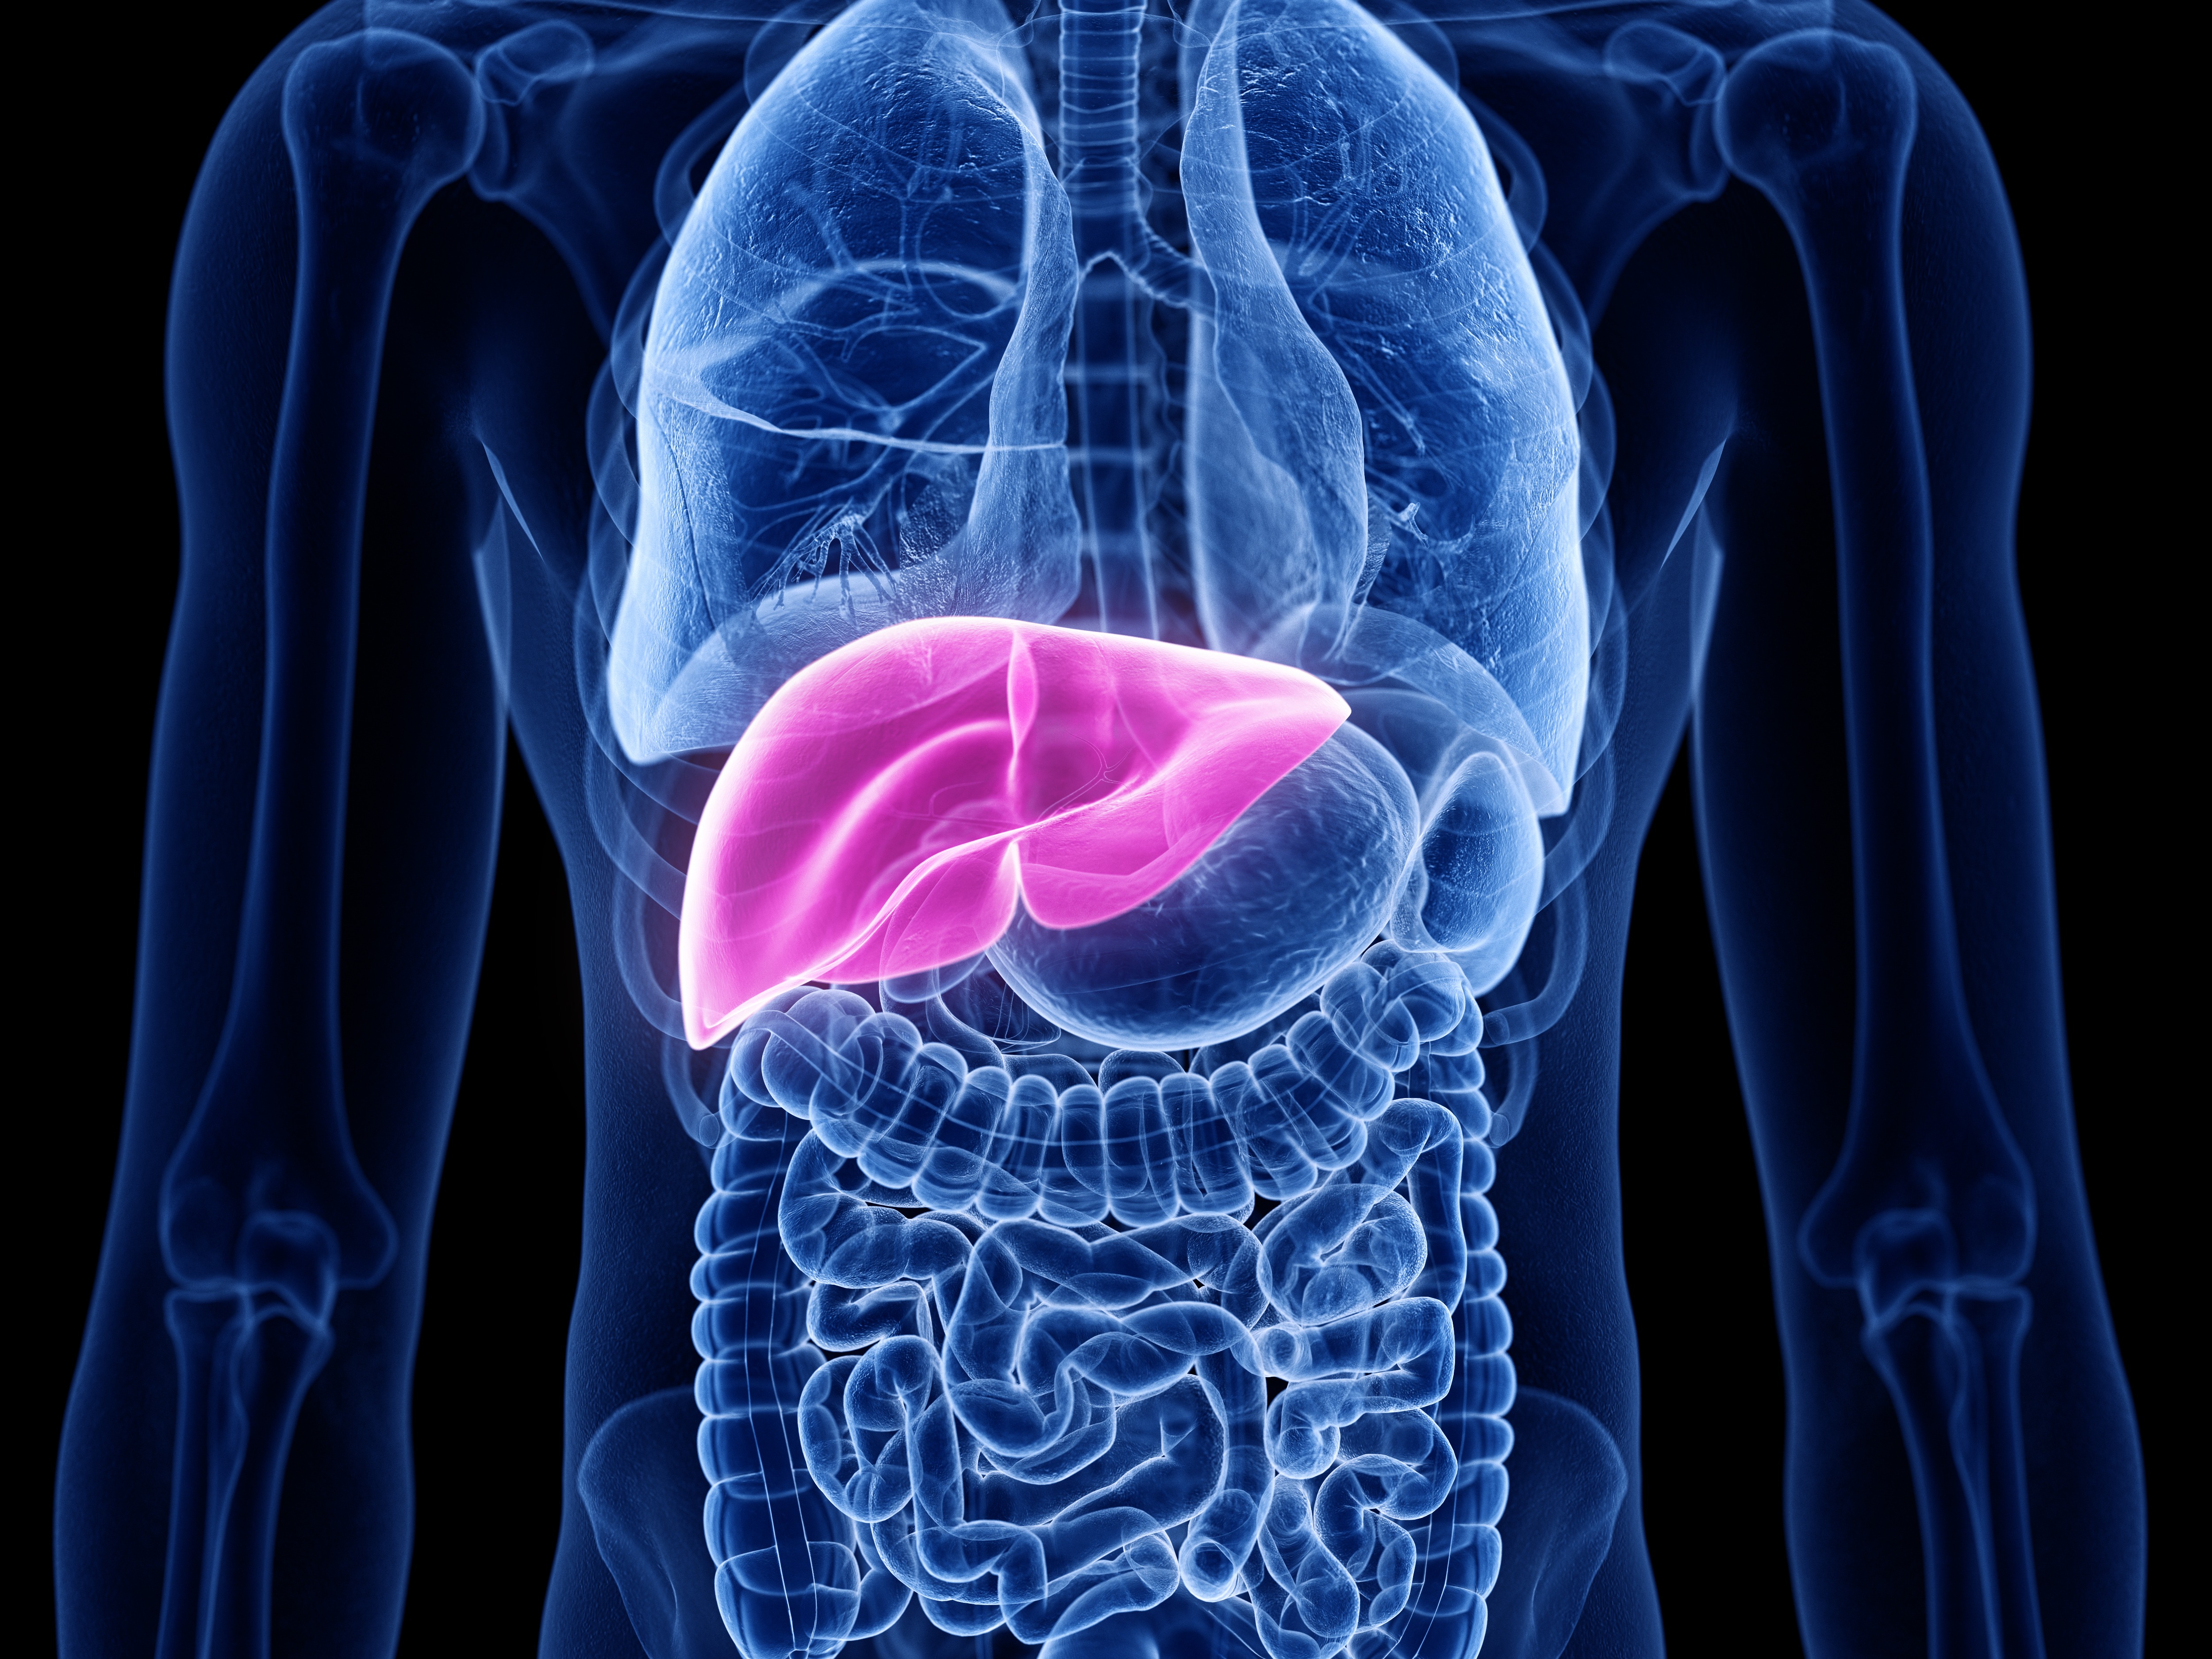 New Clinical Guidance on Treatment for Inoperable Liver Cancer